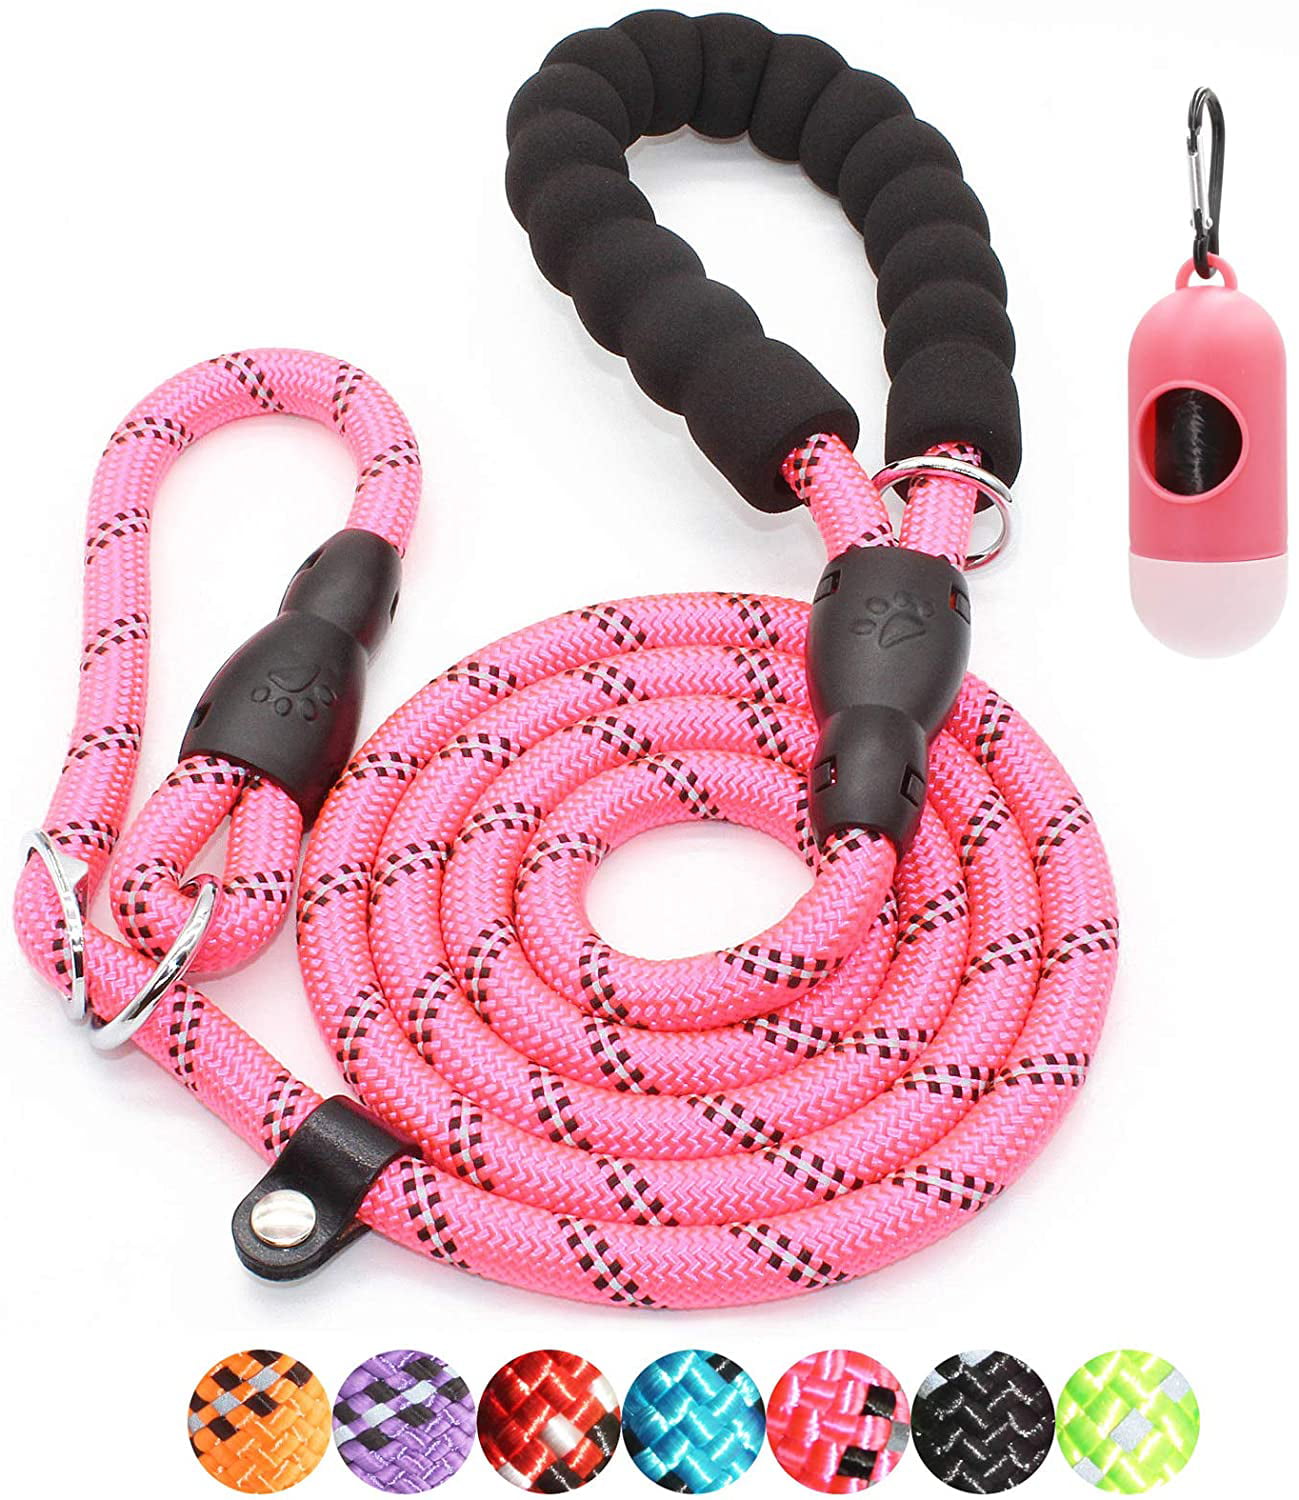 BAAPET 6 Feet Slip Lead Dog Leash Anti-Choking with Upgraded Durable Rope Cover and Comfortable Padded Handle for Large Small Dogs Trainning with Poop Bags and Dispenser Medium 